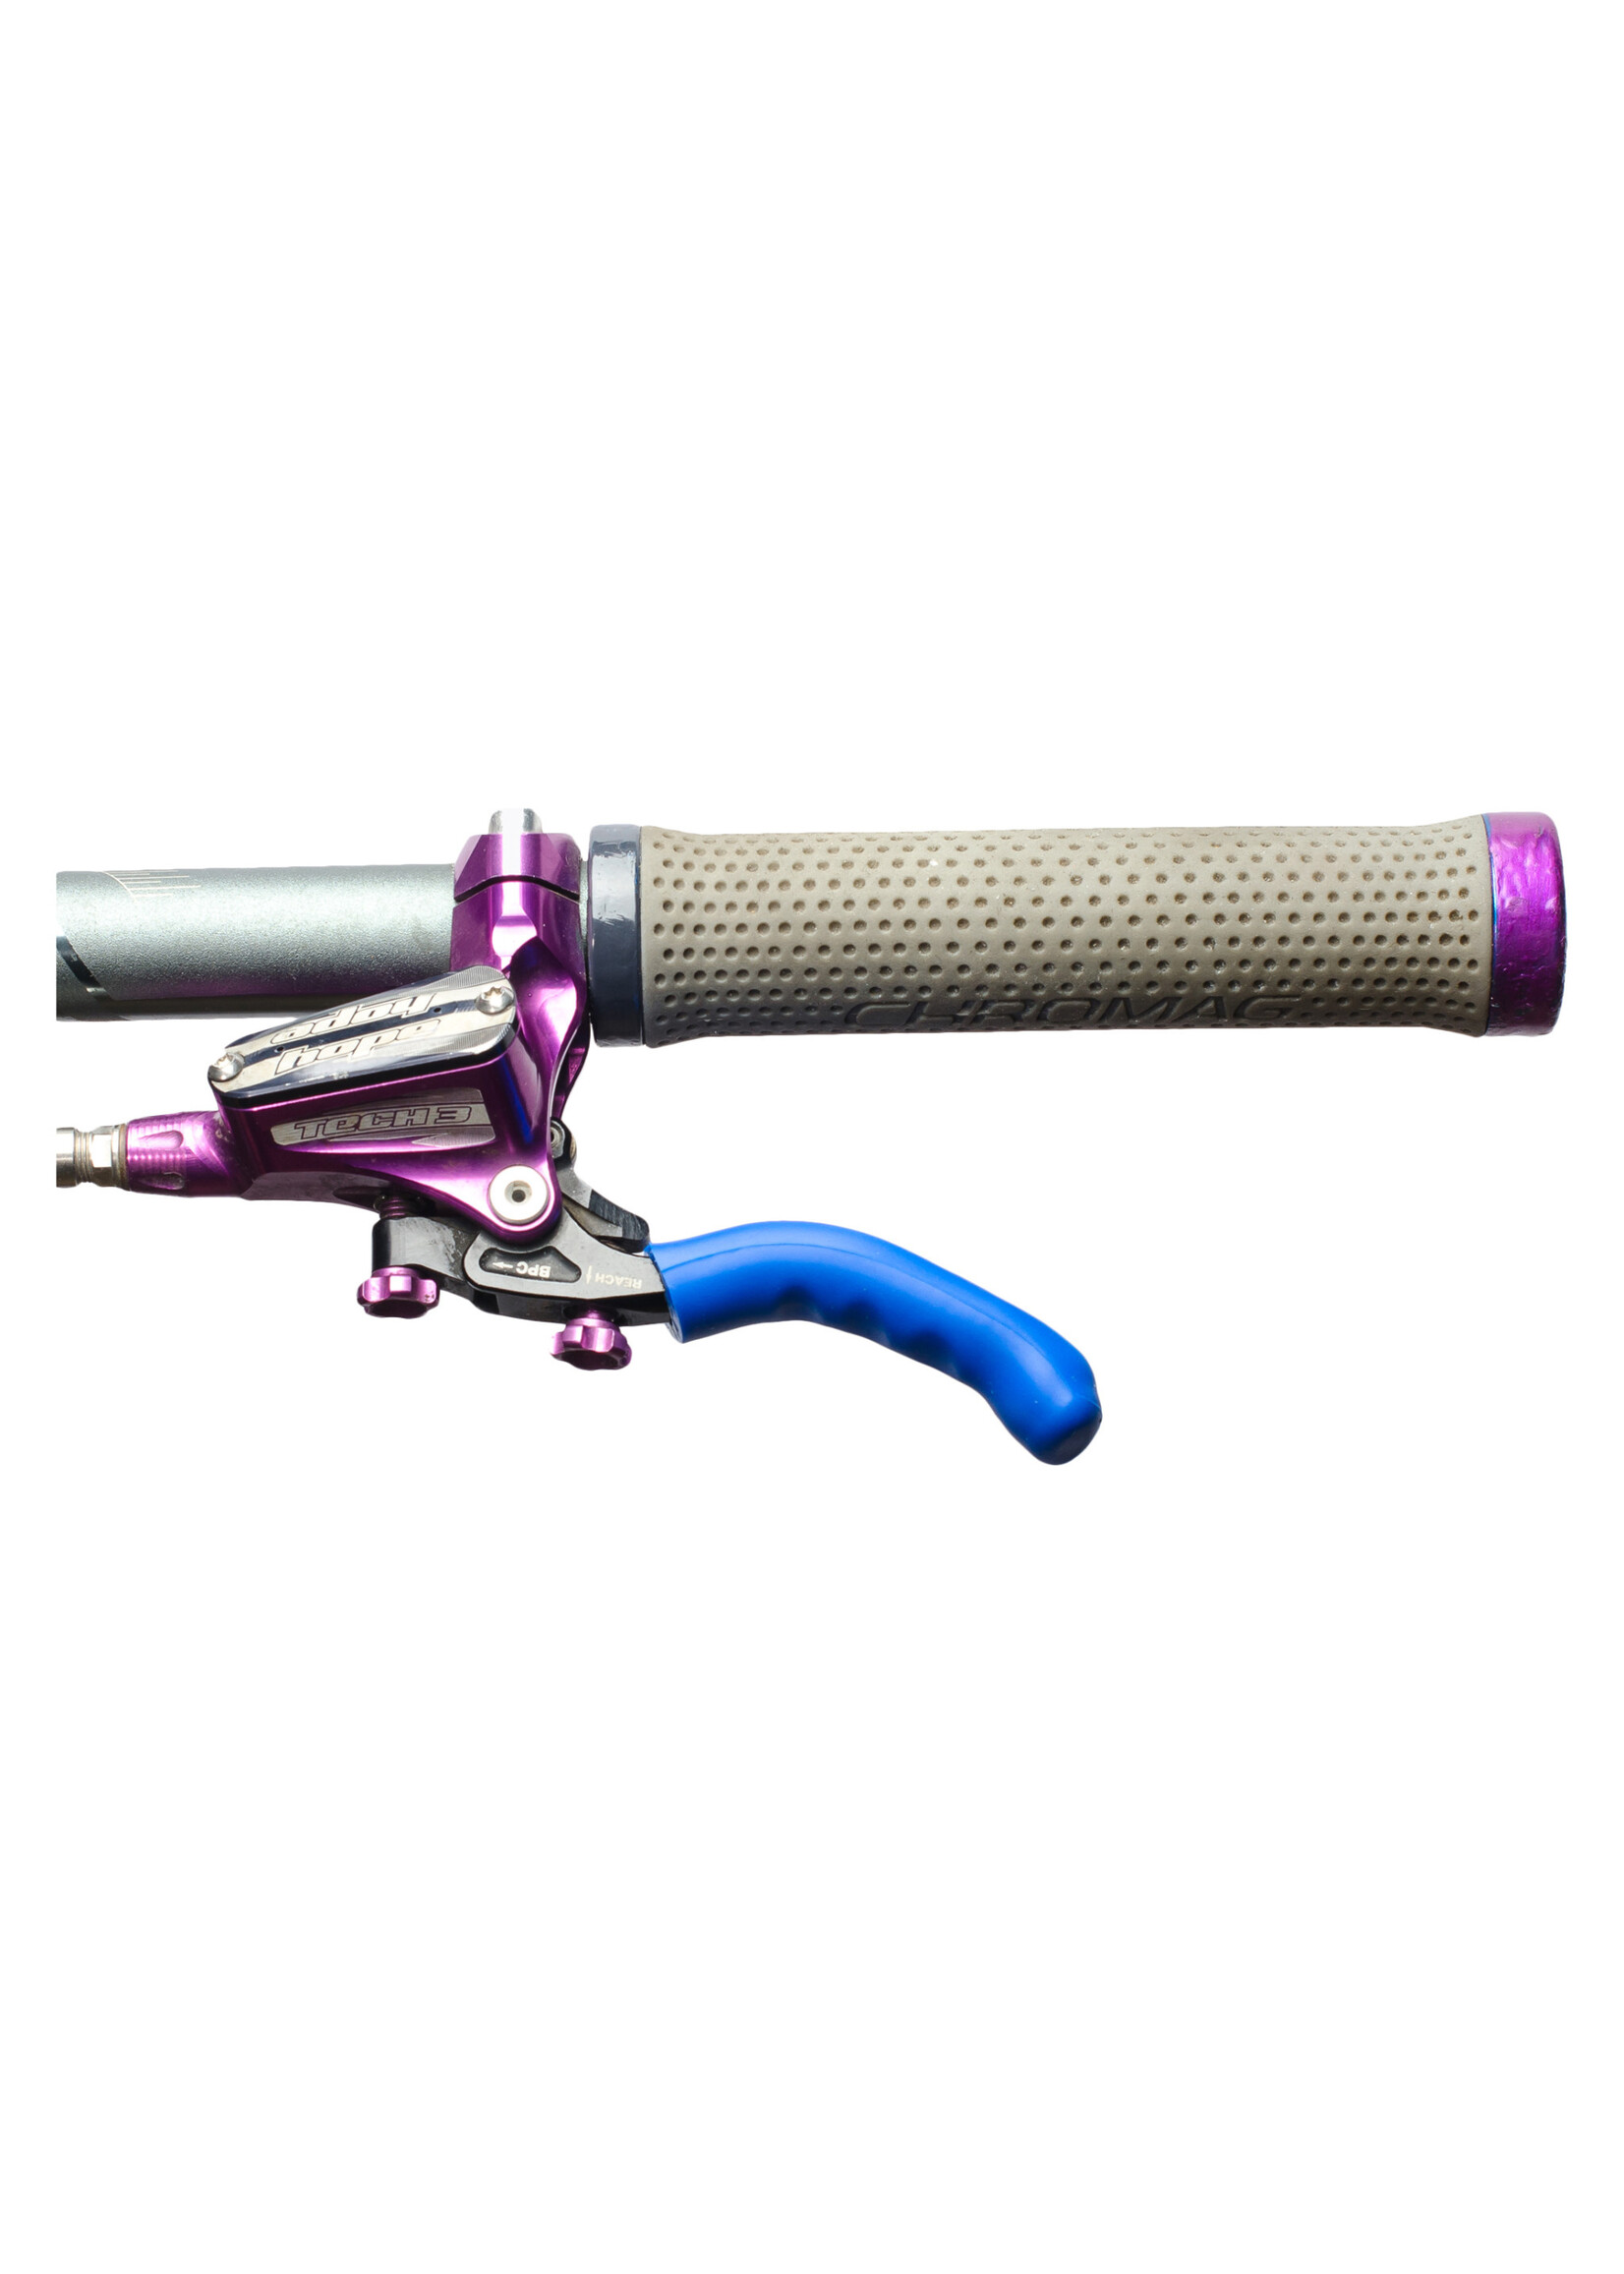 MILES WIDE GRIPS MILES WIDE BRAKE LEVER STICKY FINGERS 2.0 BLU